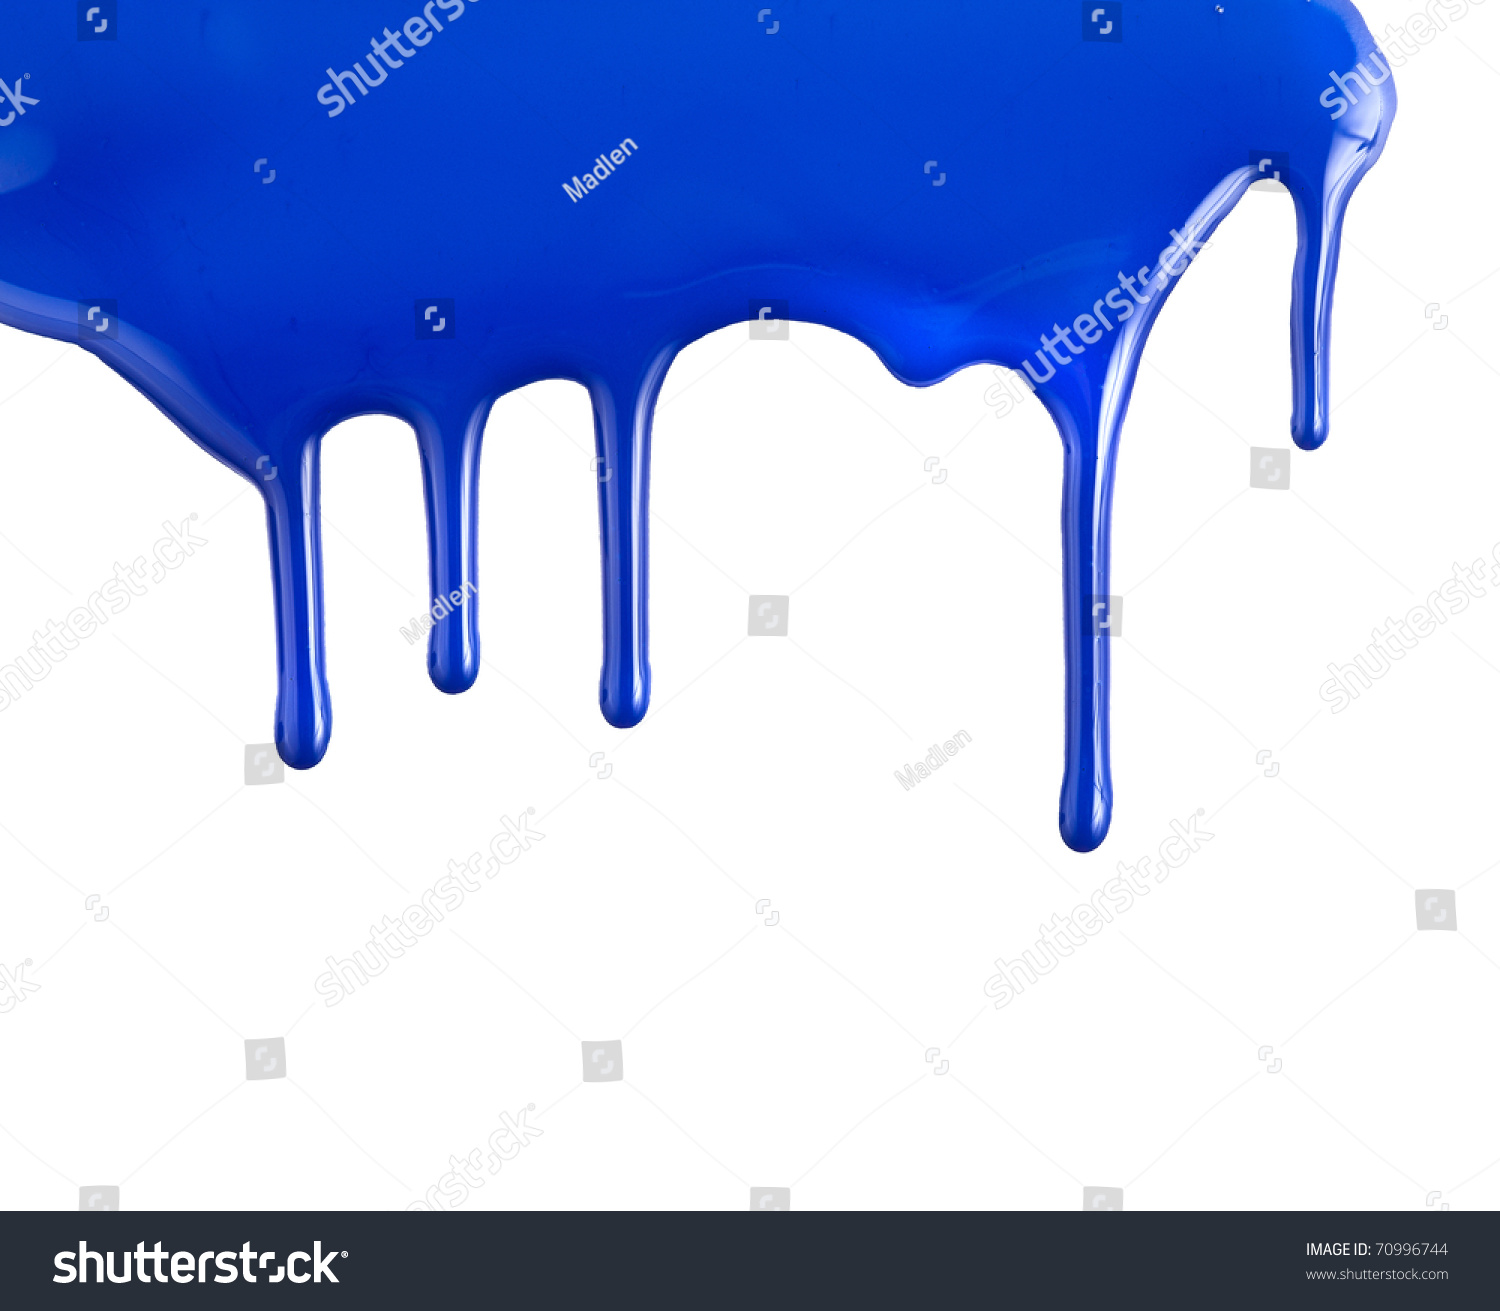 Colorful Paint Dripping Isolated On White Stock Photo 70996744 ...